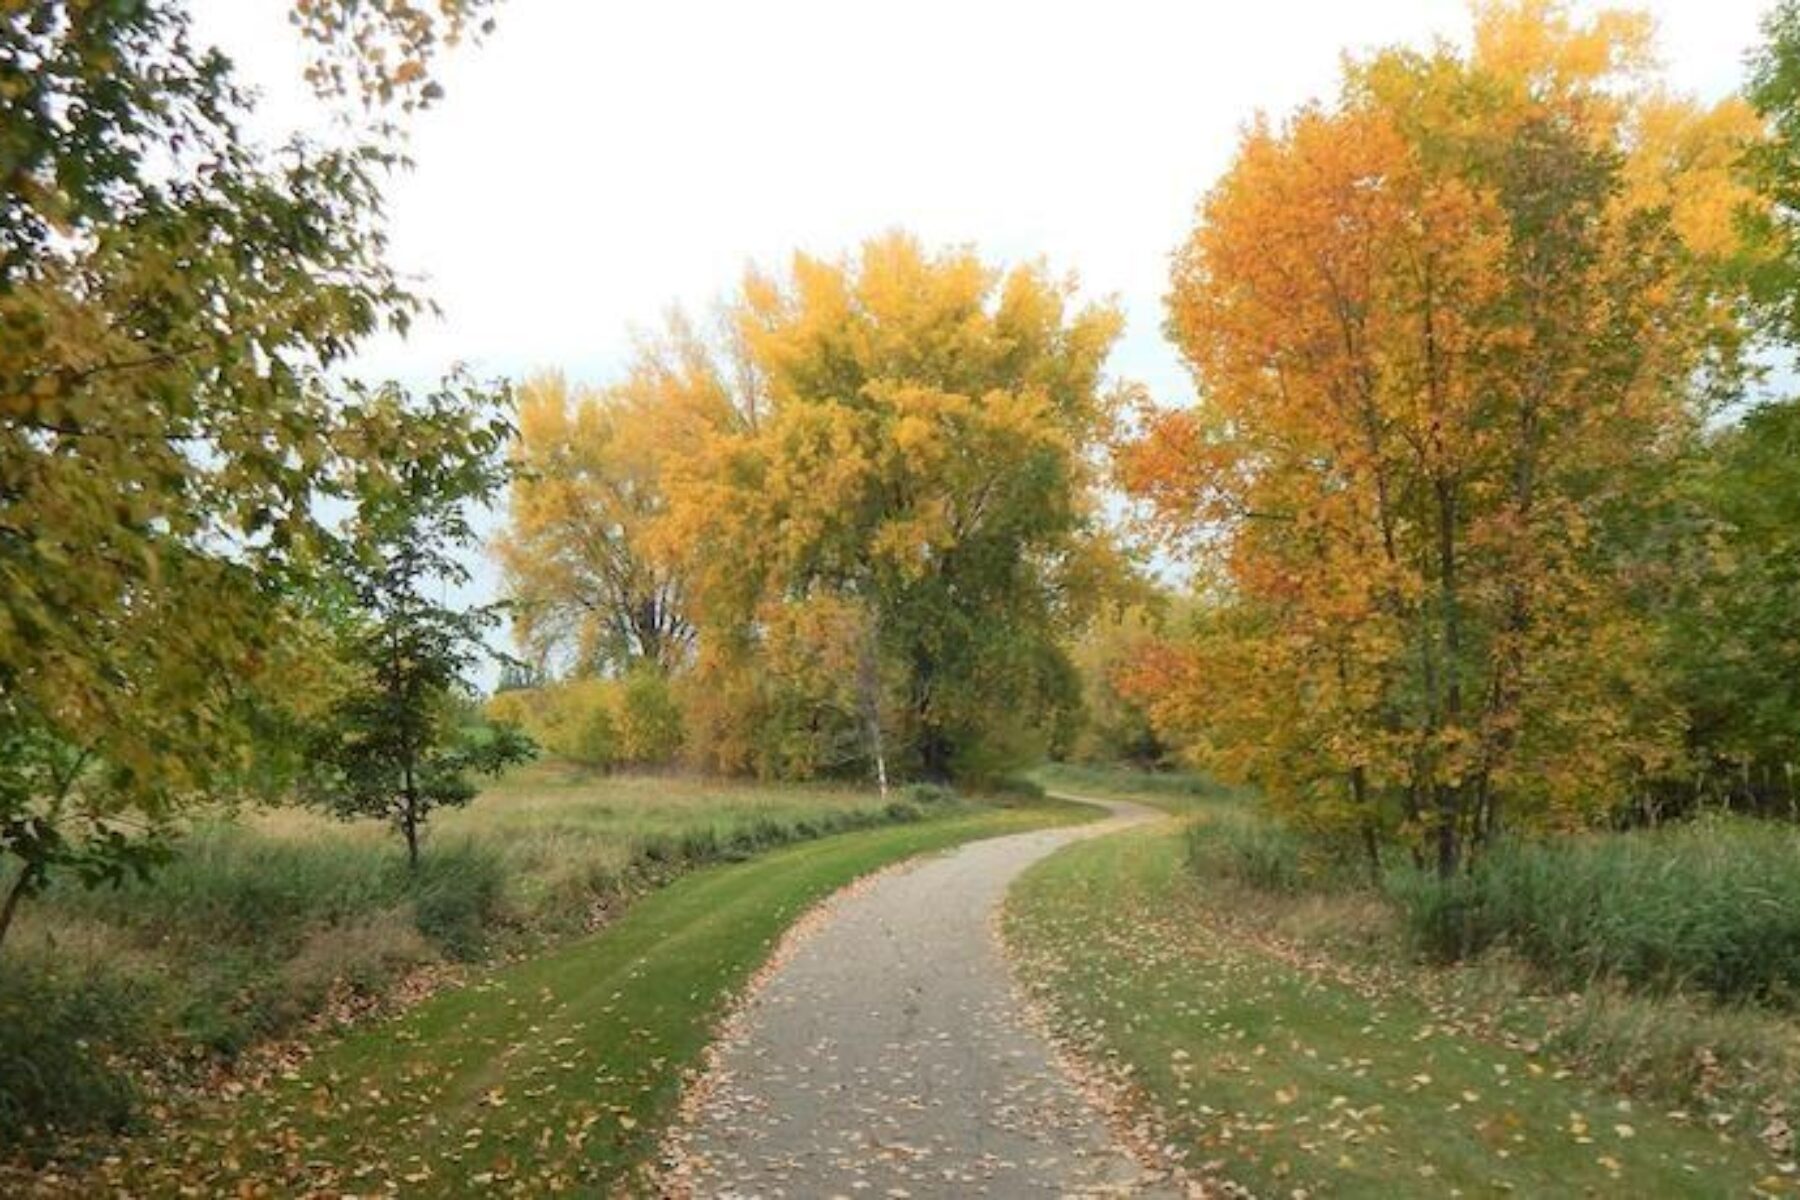 Greenway of Greater Grand Forks | Photo by TrailLink user thejake91739